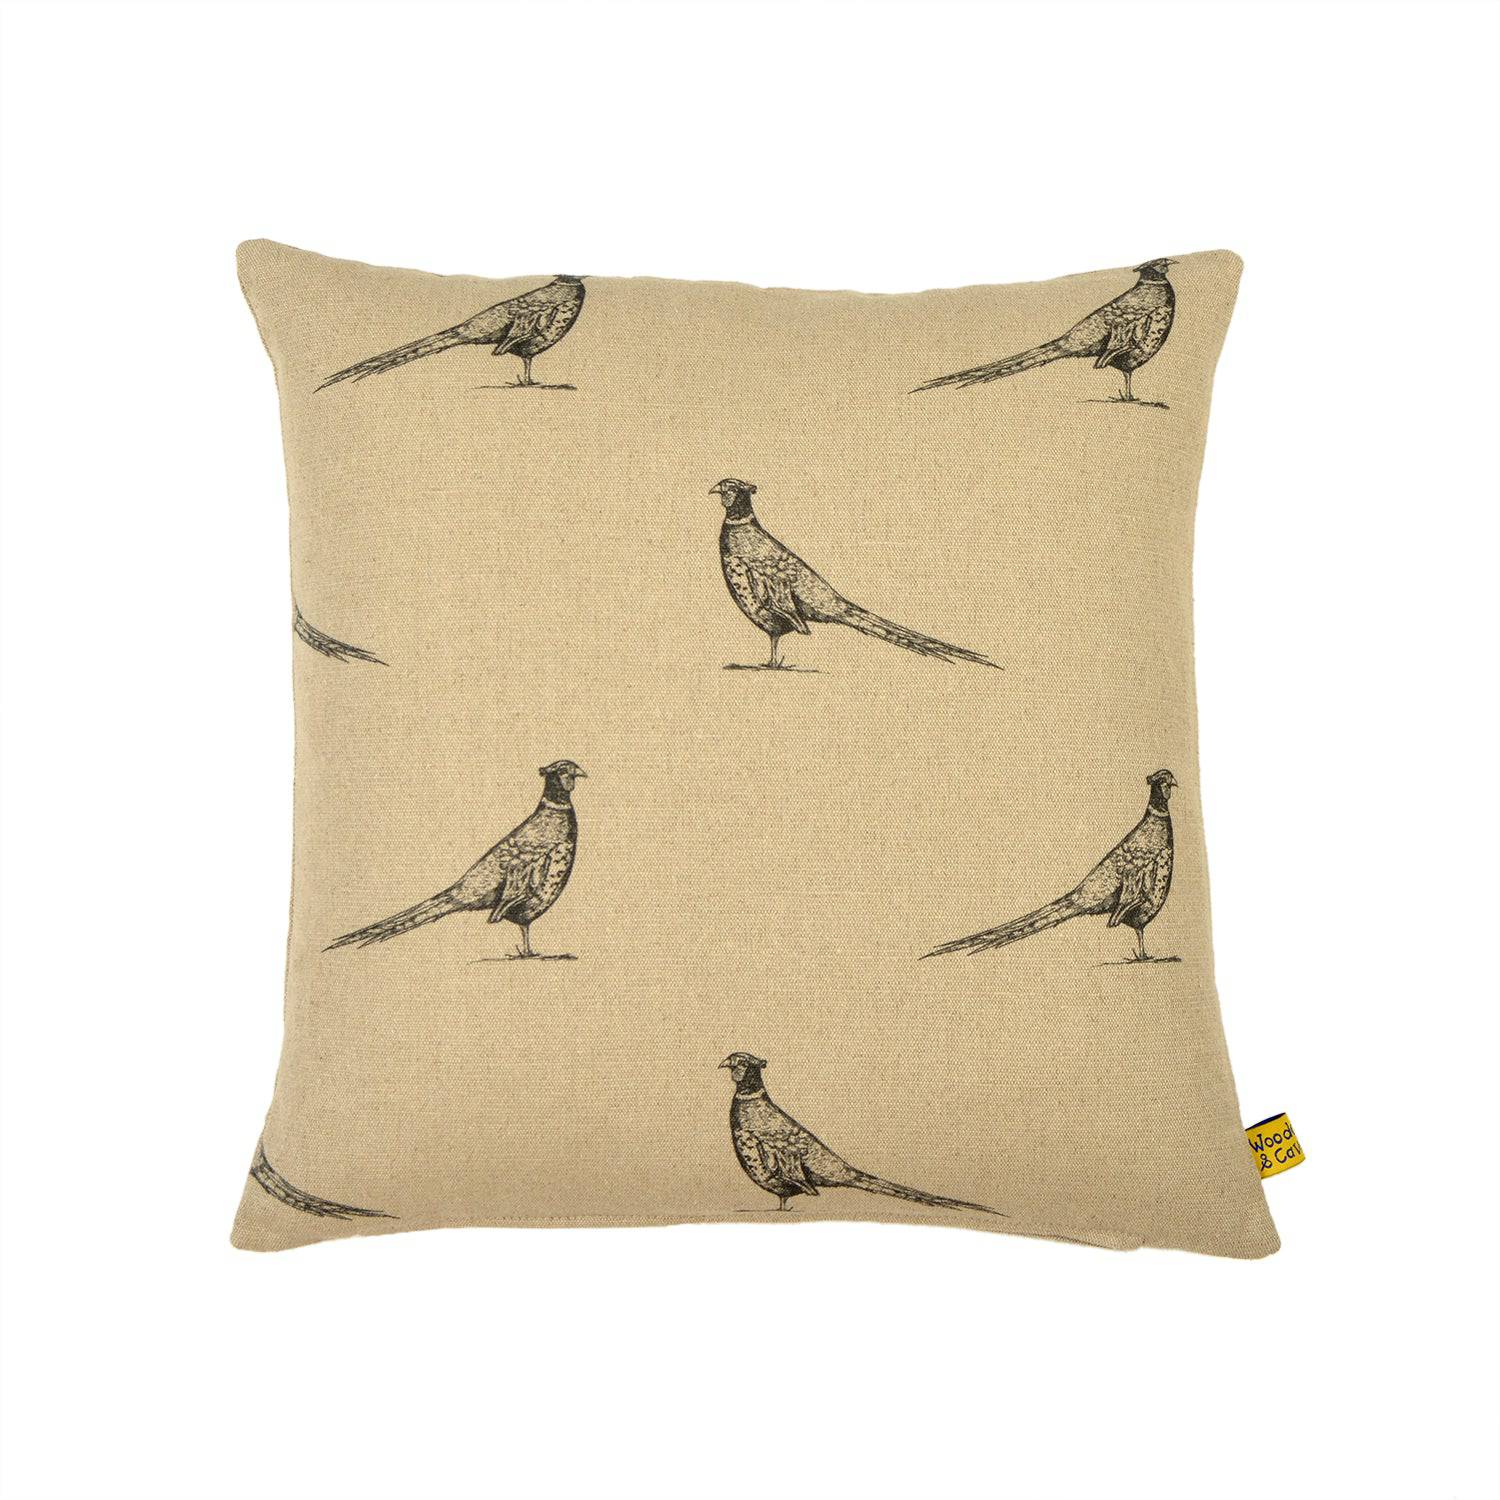 Pheasant Linen Cushion by Woodcock & Cavendish for sale - Woodcock and Cavendish